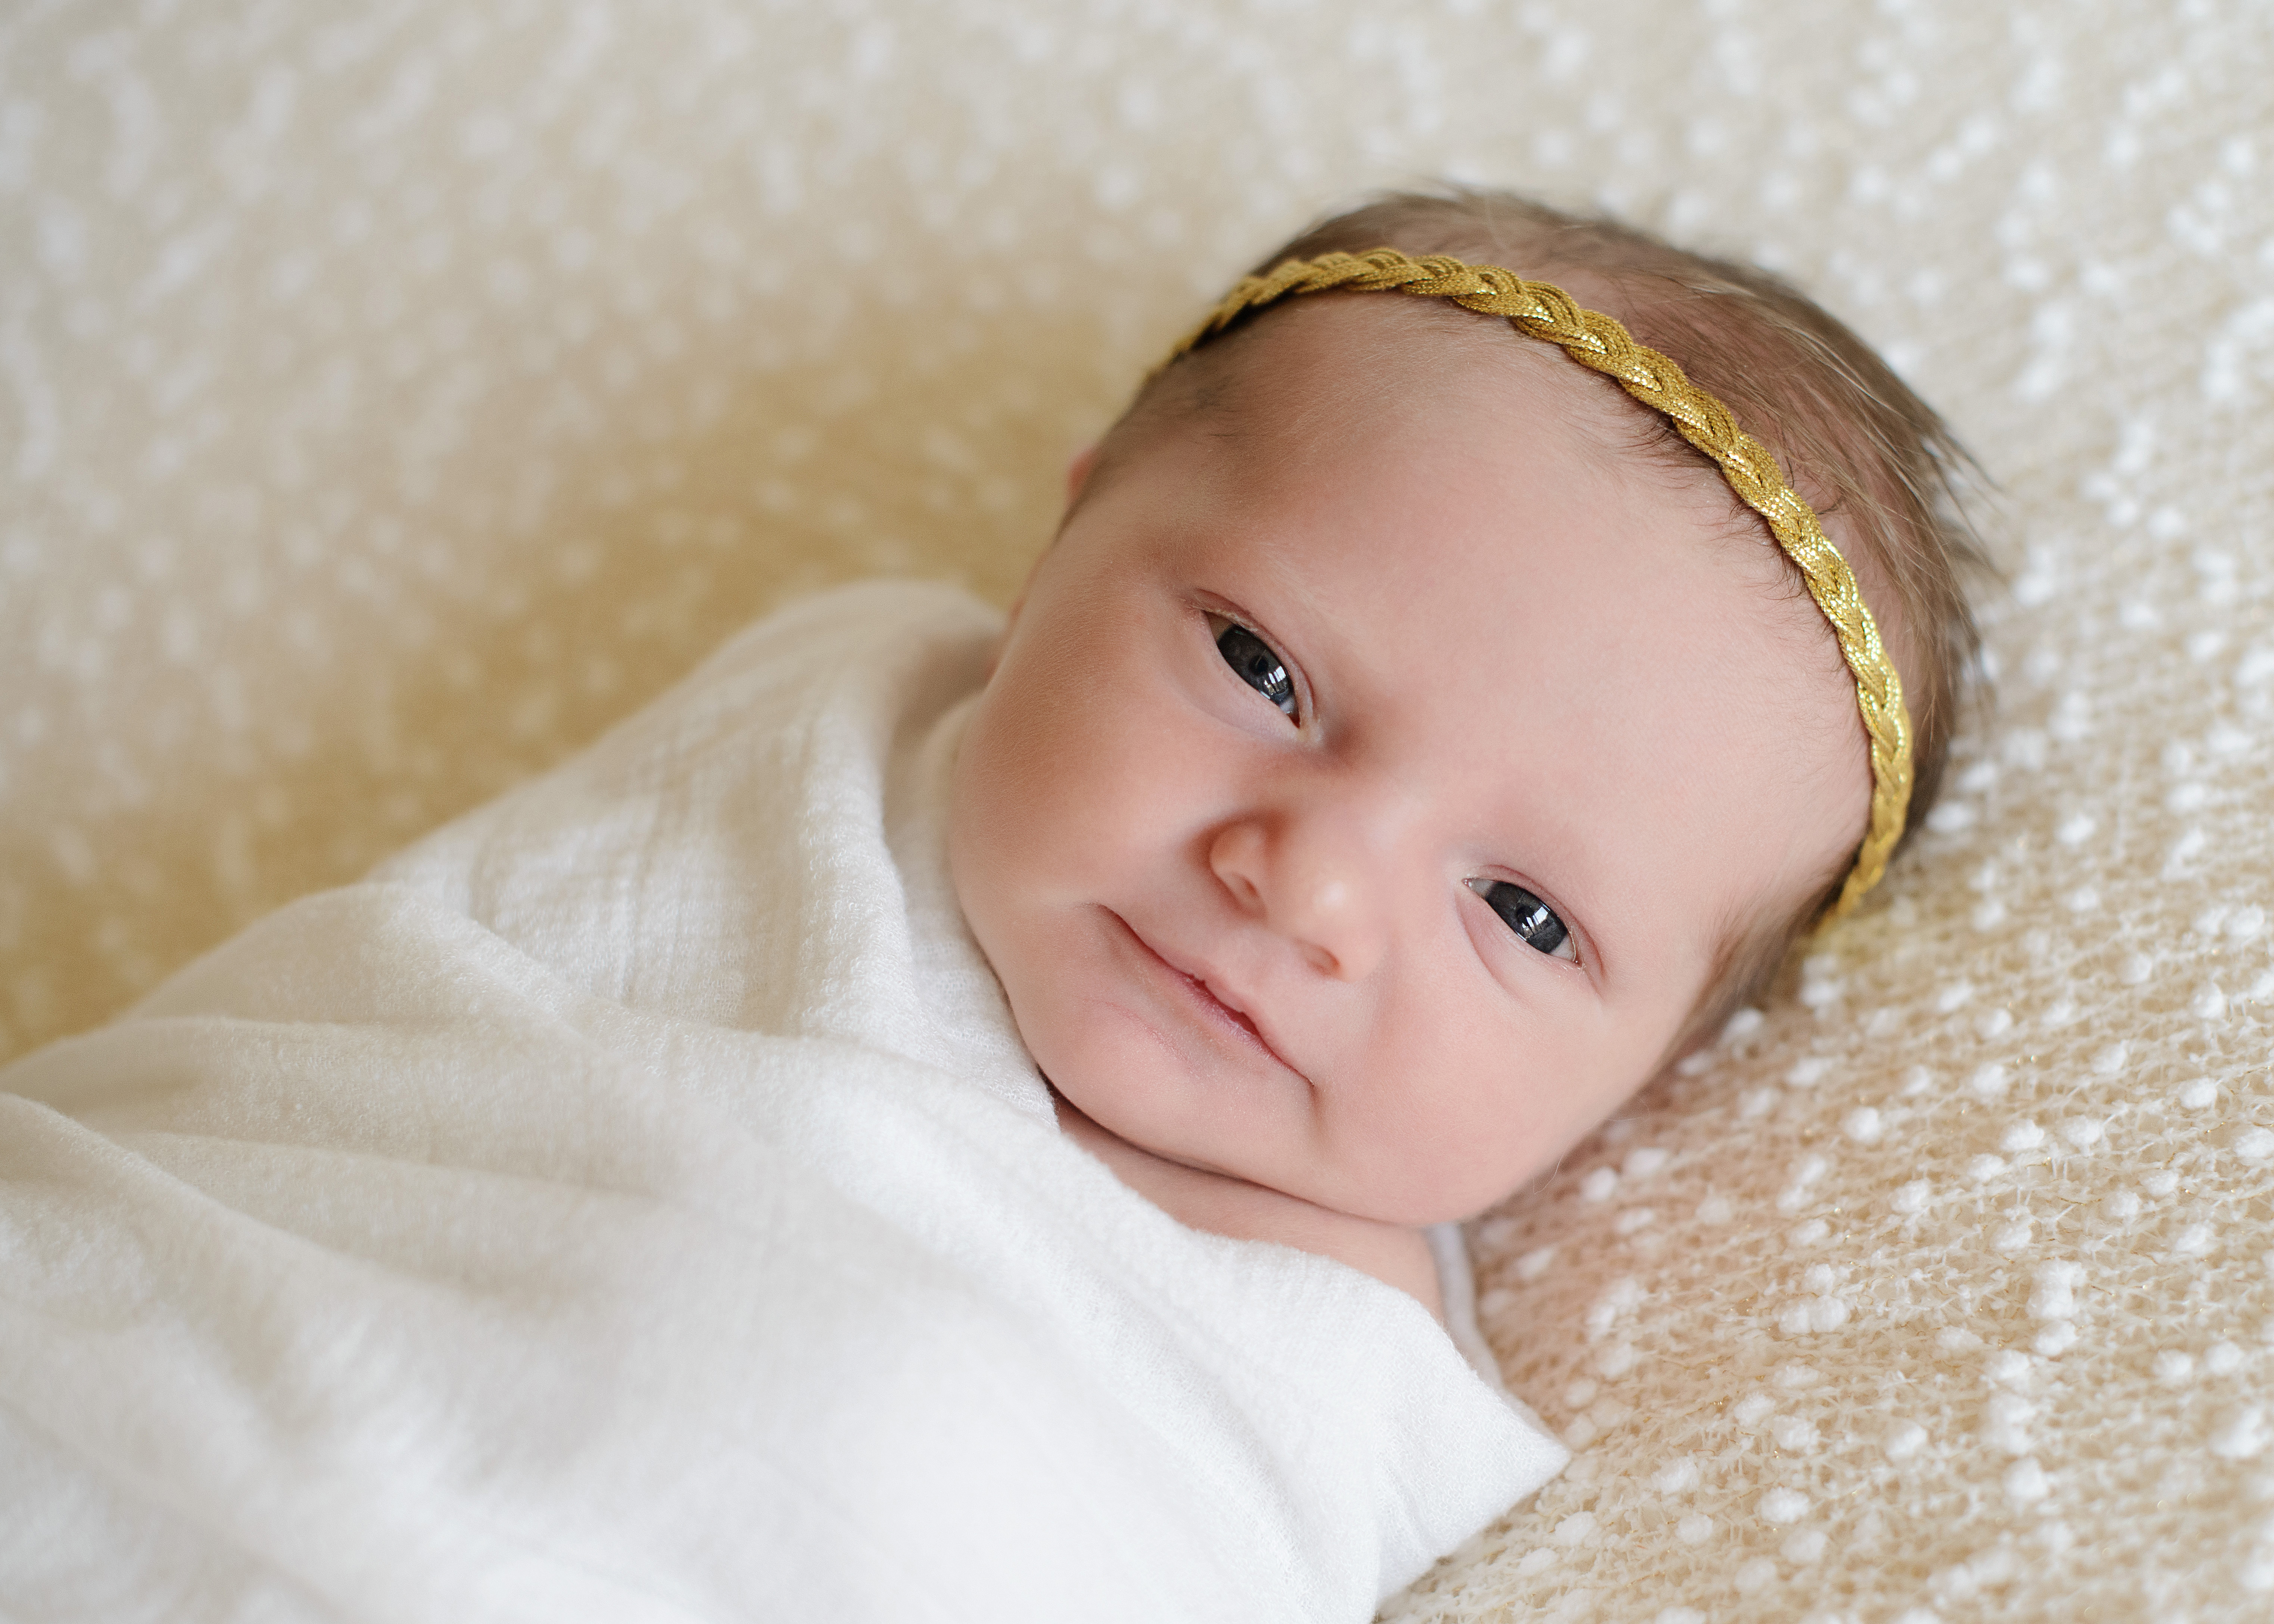 Newborn baby girl in gold headband on white blanket and swaddle